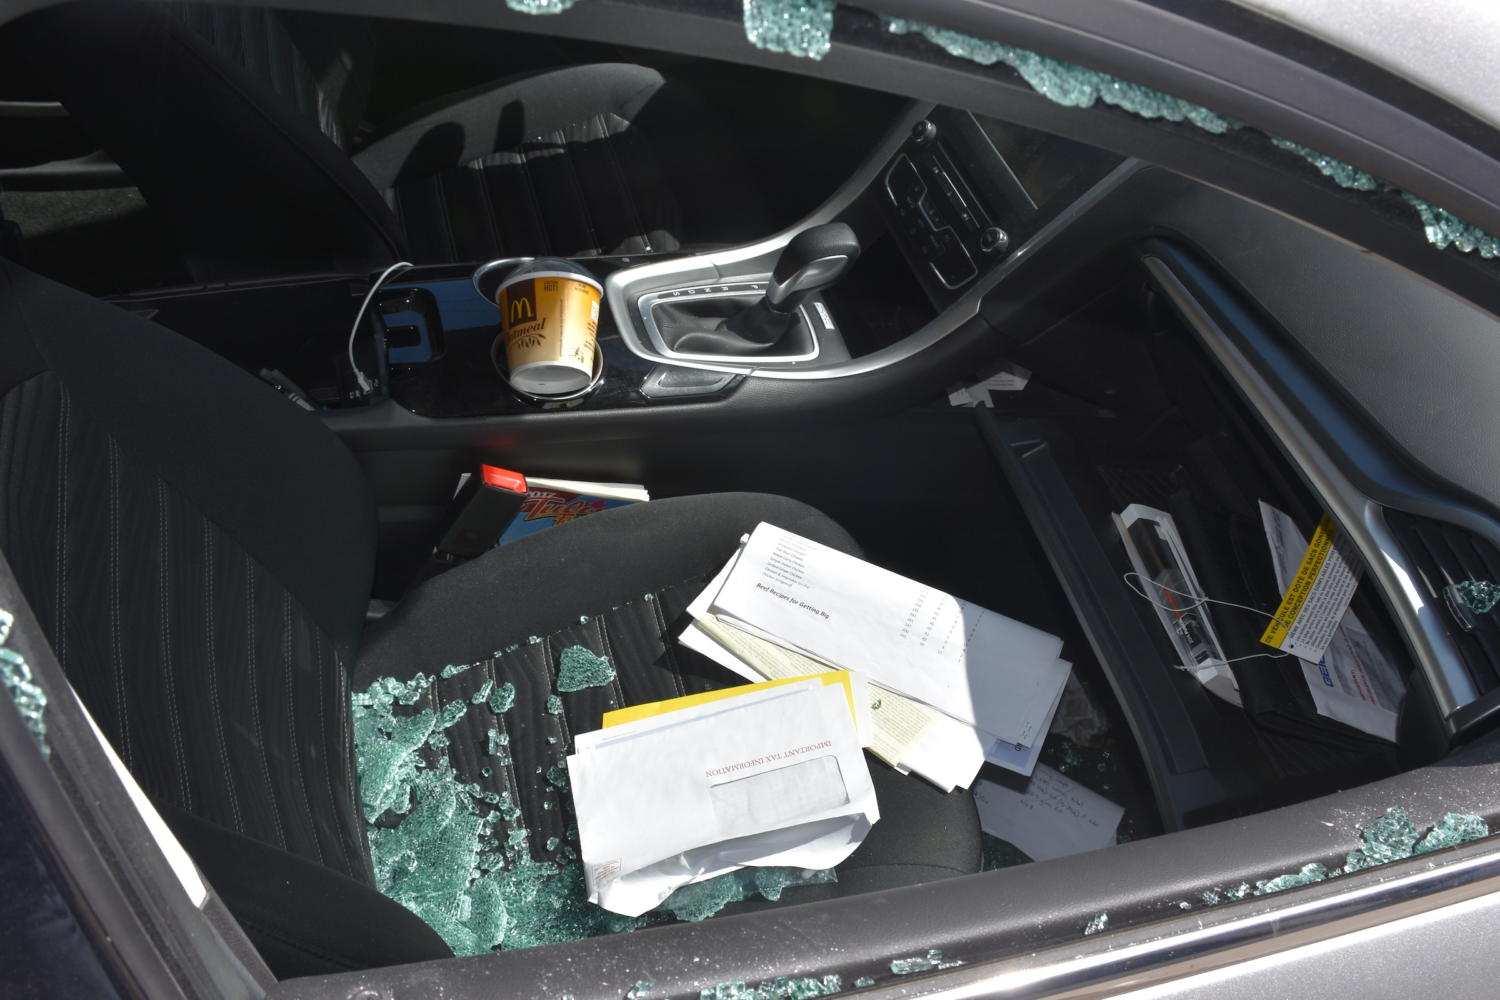 Several cars were broken into and looted near the intersection of Southwest 16th Avenue and Salmon
Street on May 8.